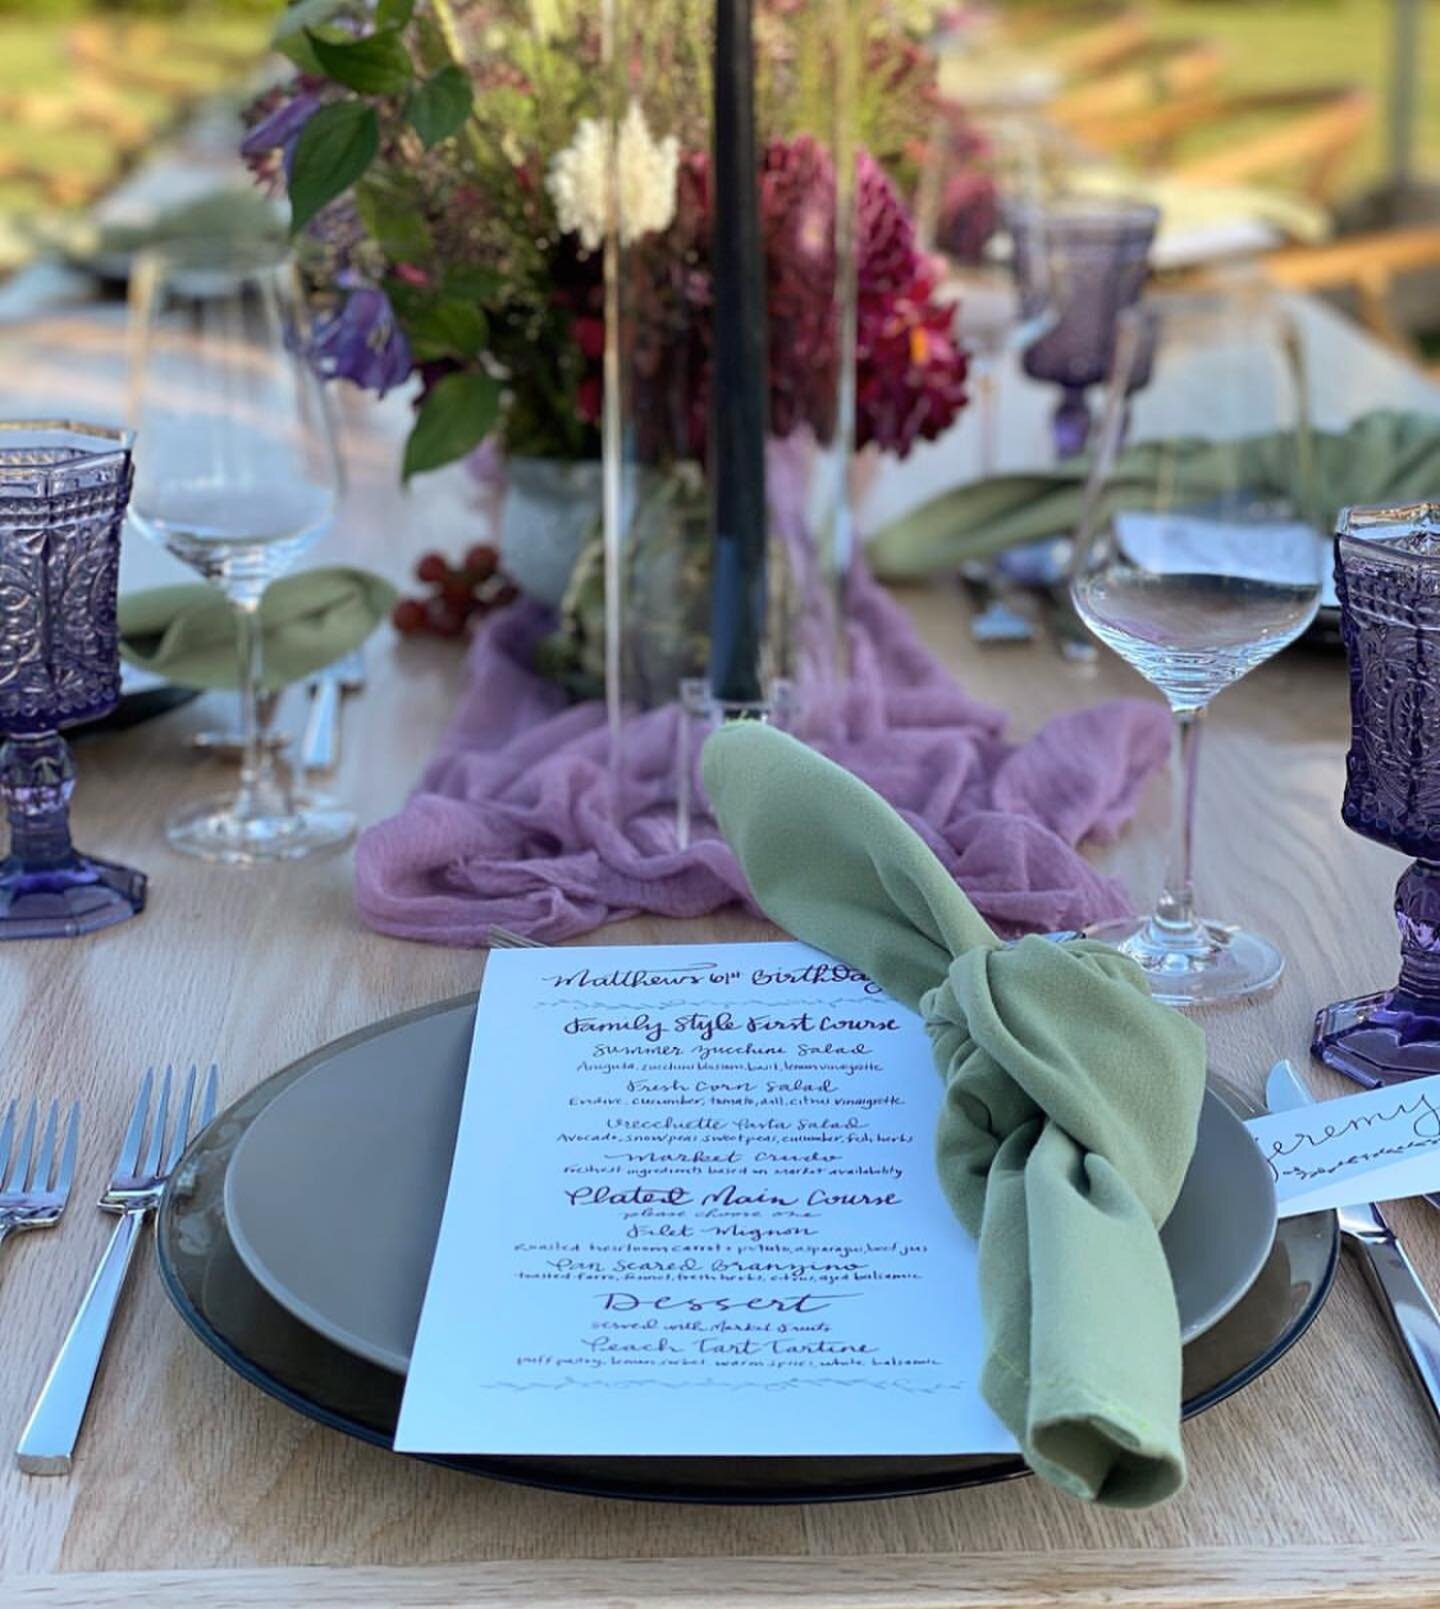 Summer dinner parties are my favorite dinner parties to make hand-lettered menus &amp; place cards for . 🤍
📸: @deccobypartyup 
.
.
.
.
.
#summernights #birthdaycelebration #privateparty #handlettered #details #hamptons #eastend #handwritten #callig